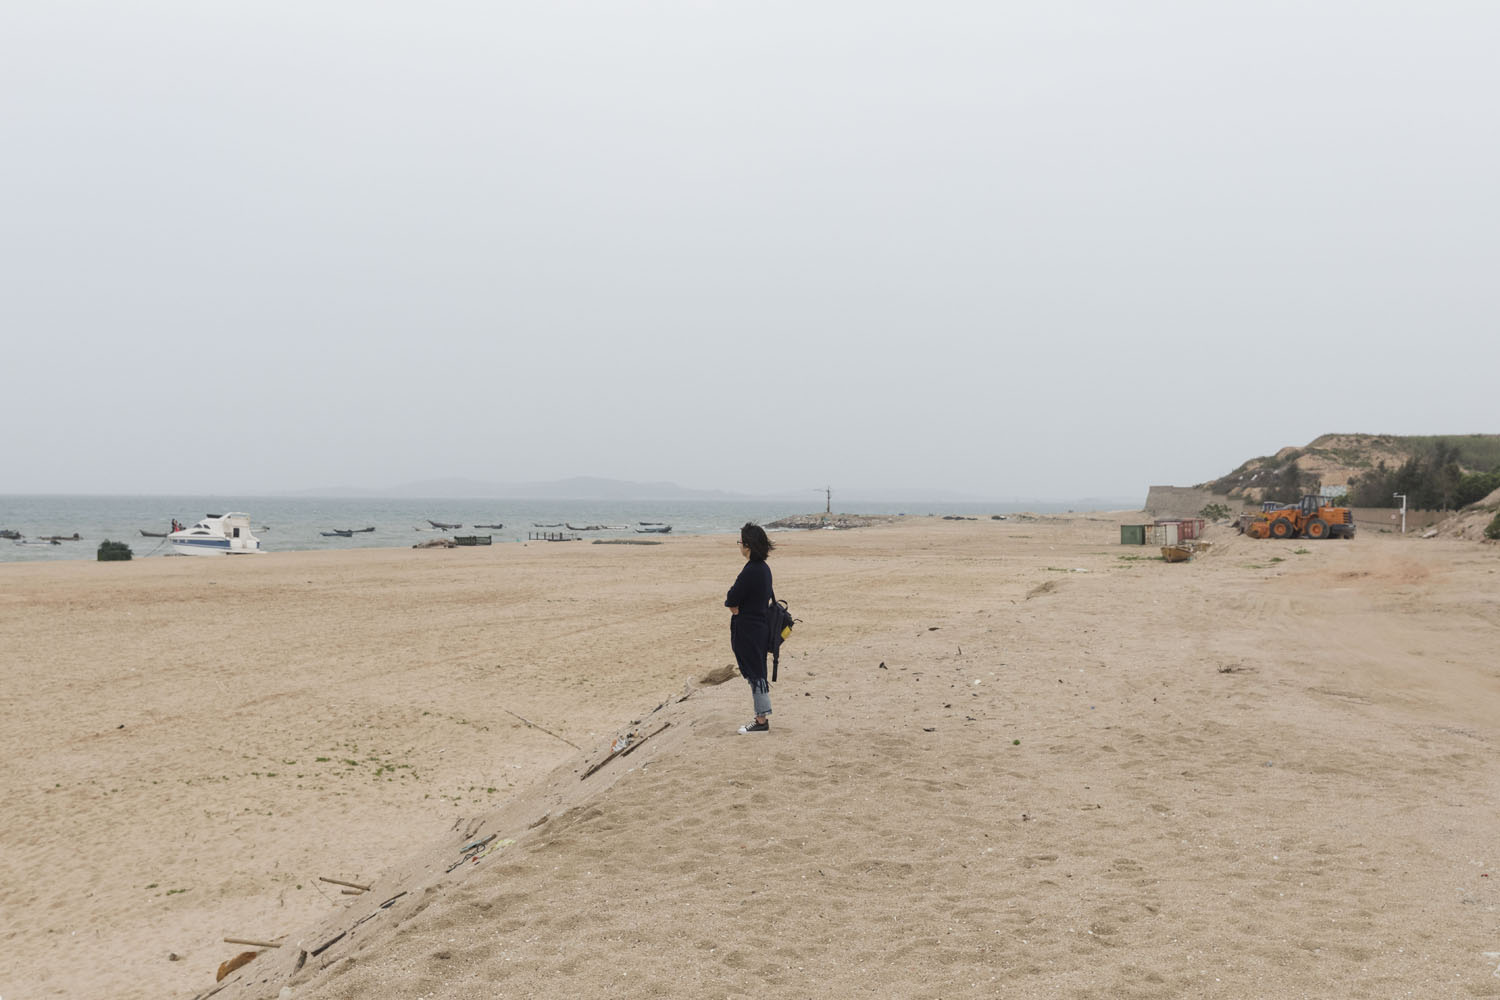 A woman standing at the top of a dune, overlooking Guanyinshan Fantasy Beach. Xiamen, China. 2018.